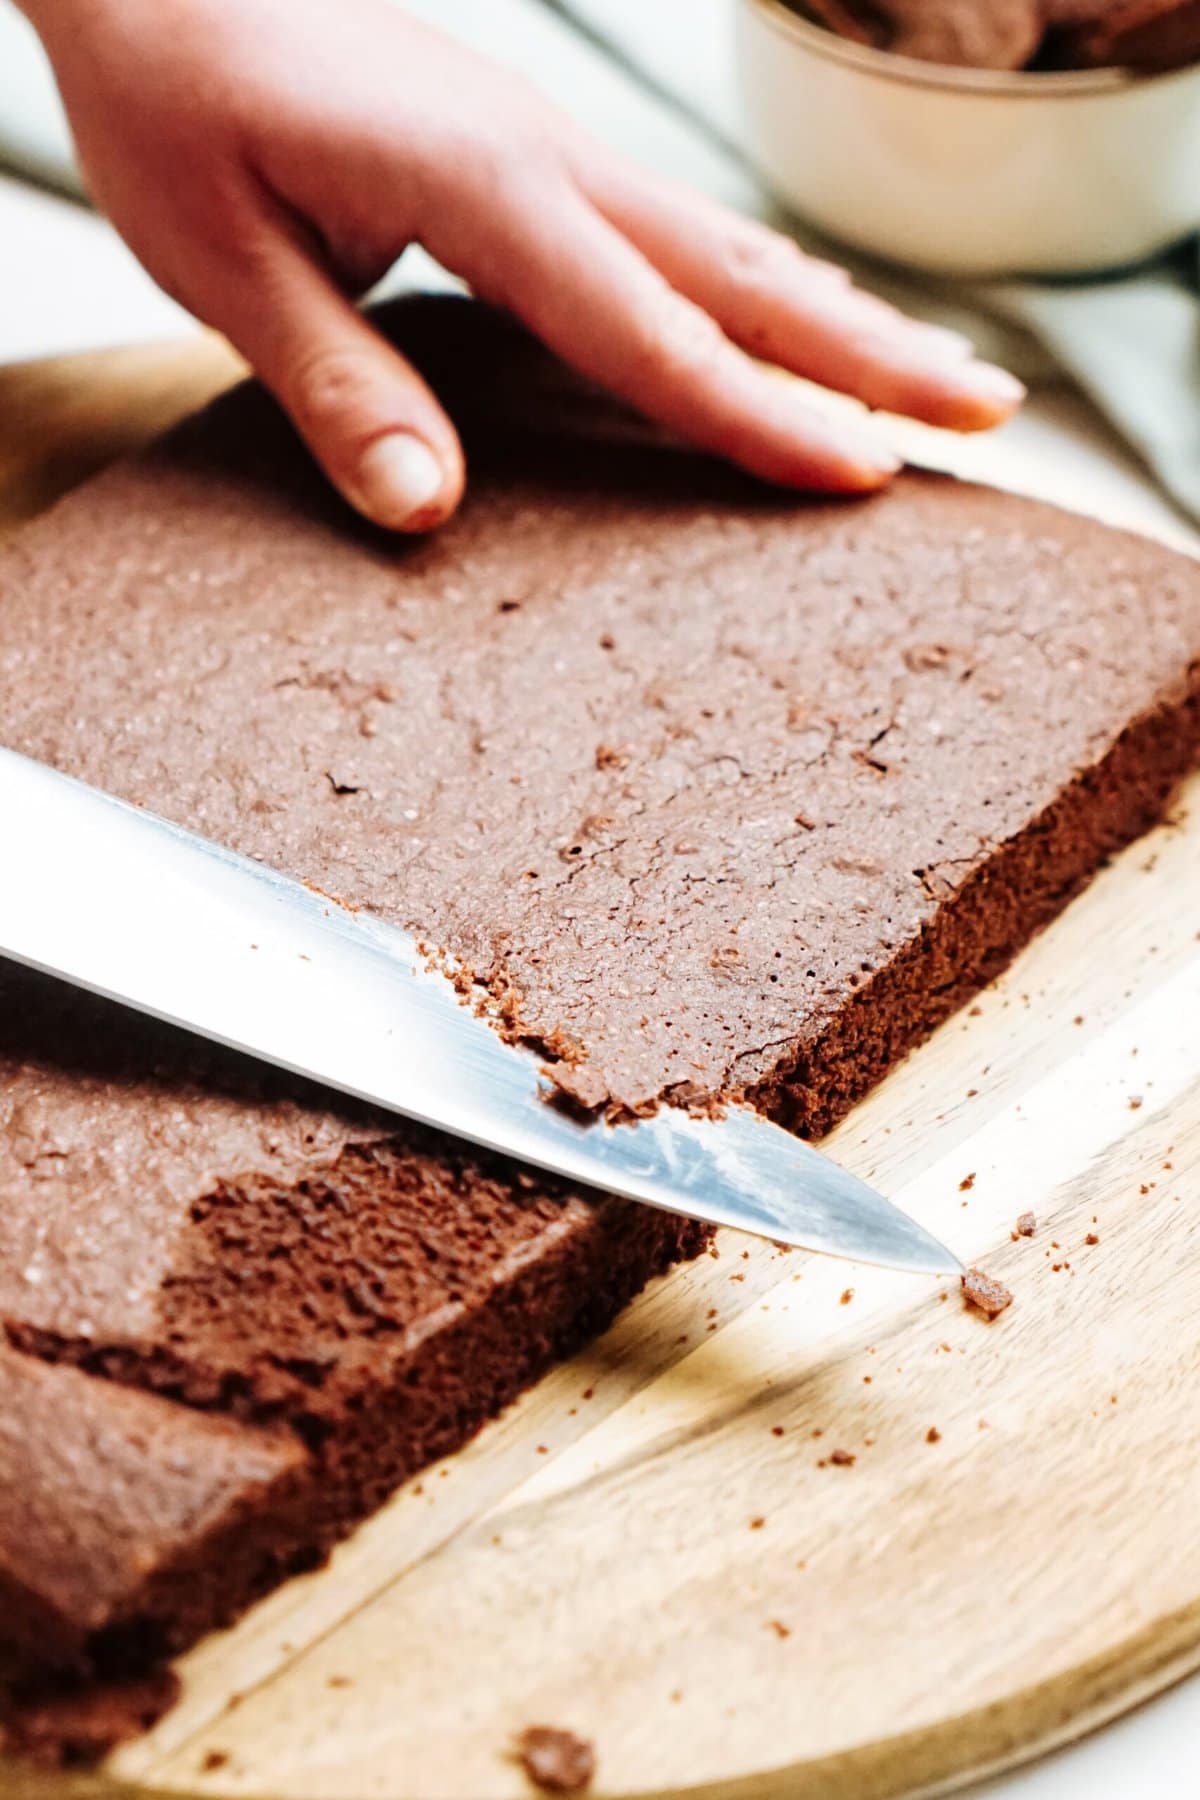 A person cutting the top of chocolate cake on a cutting board.